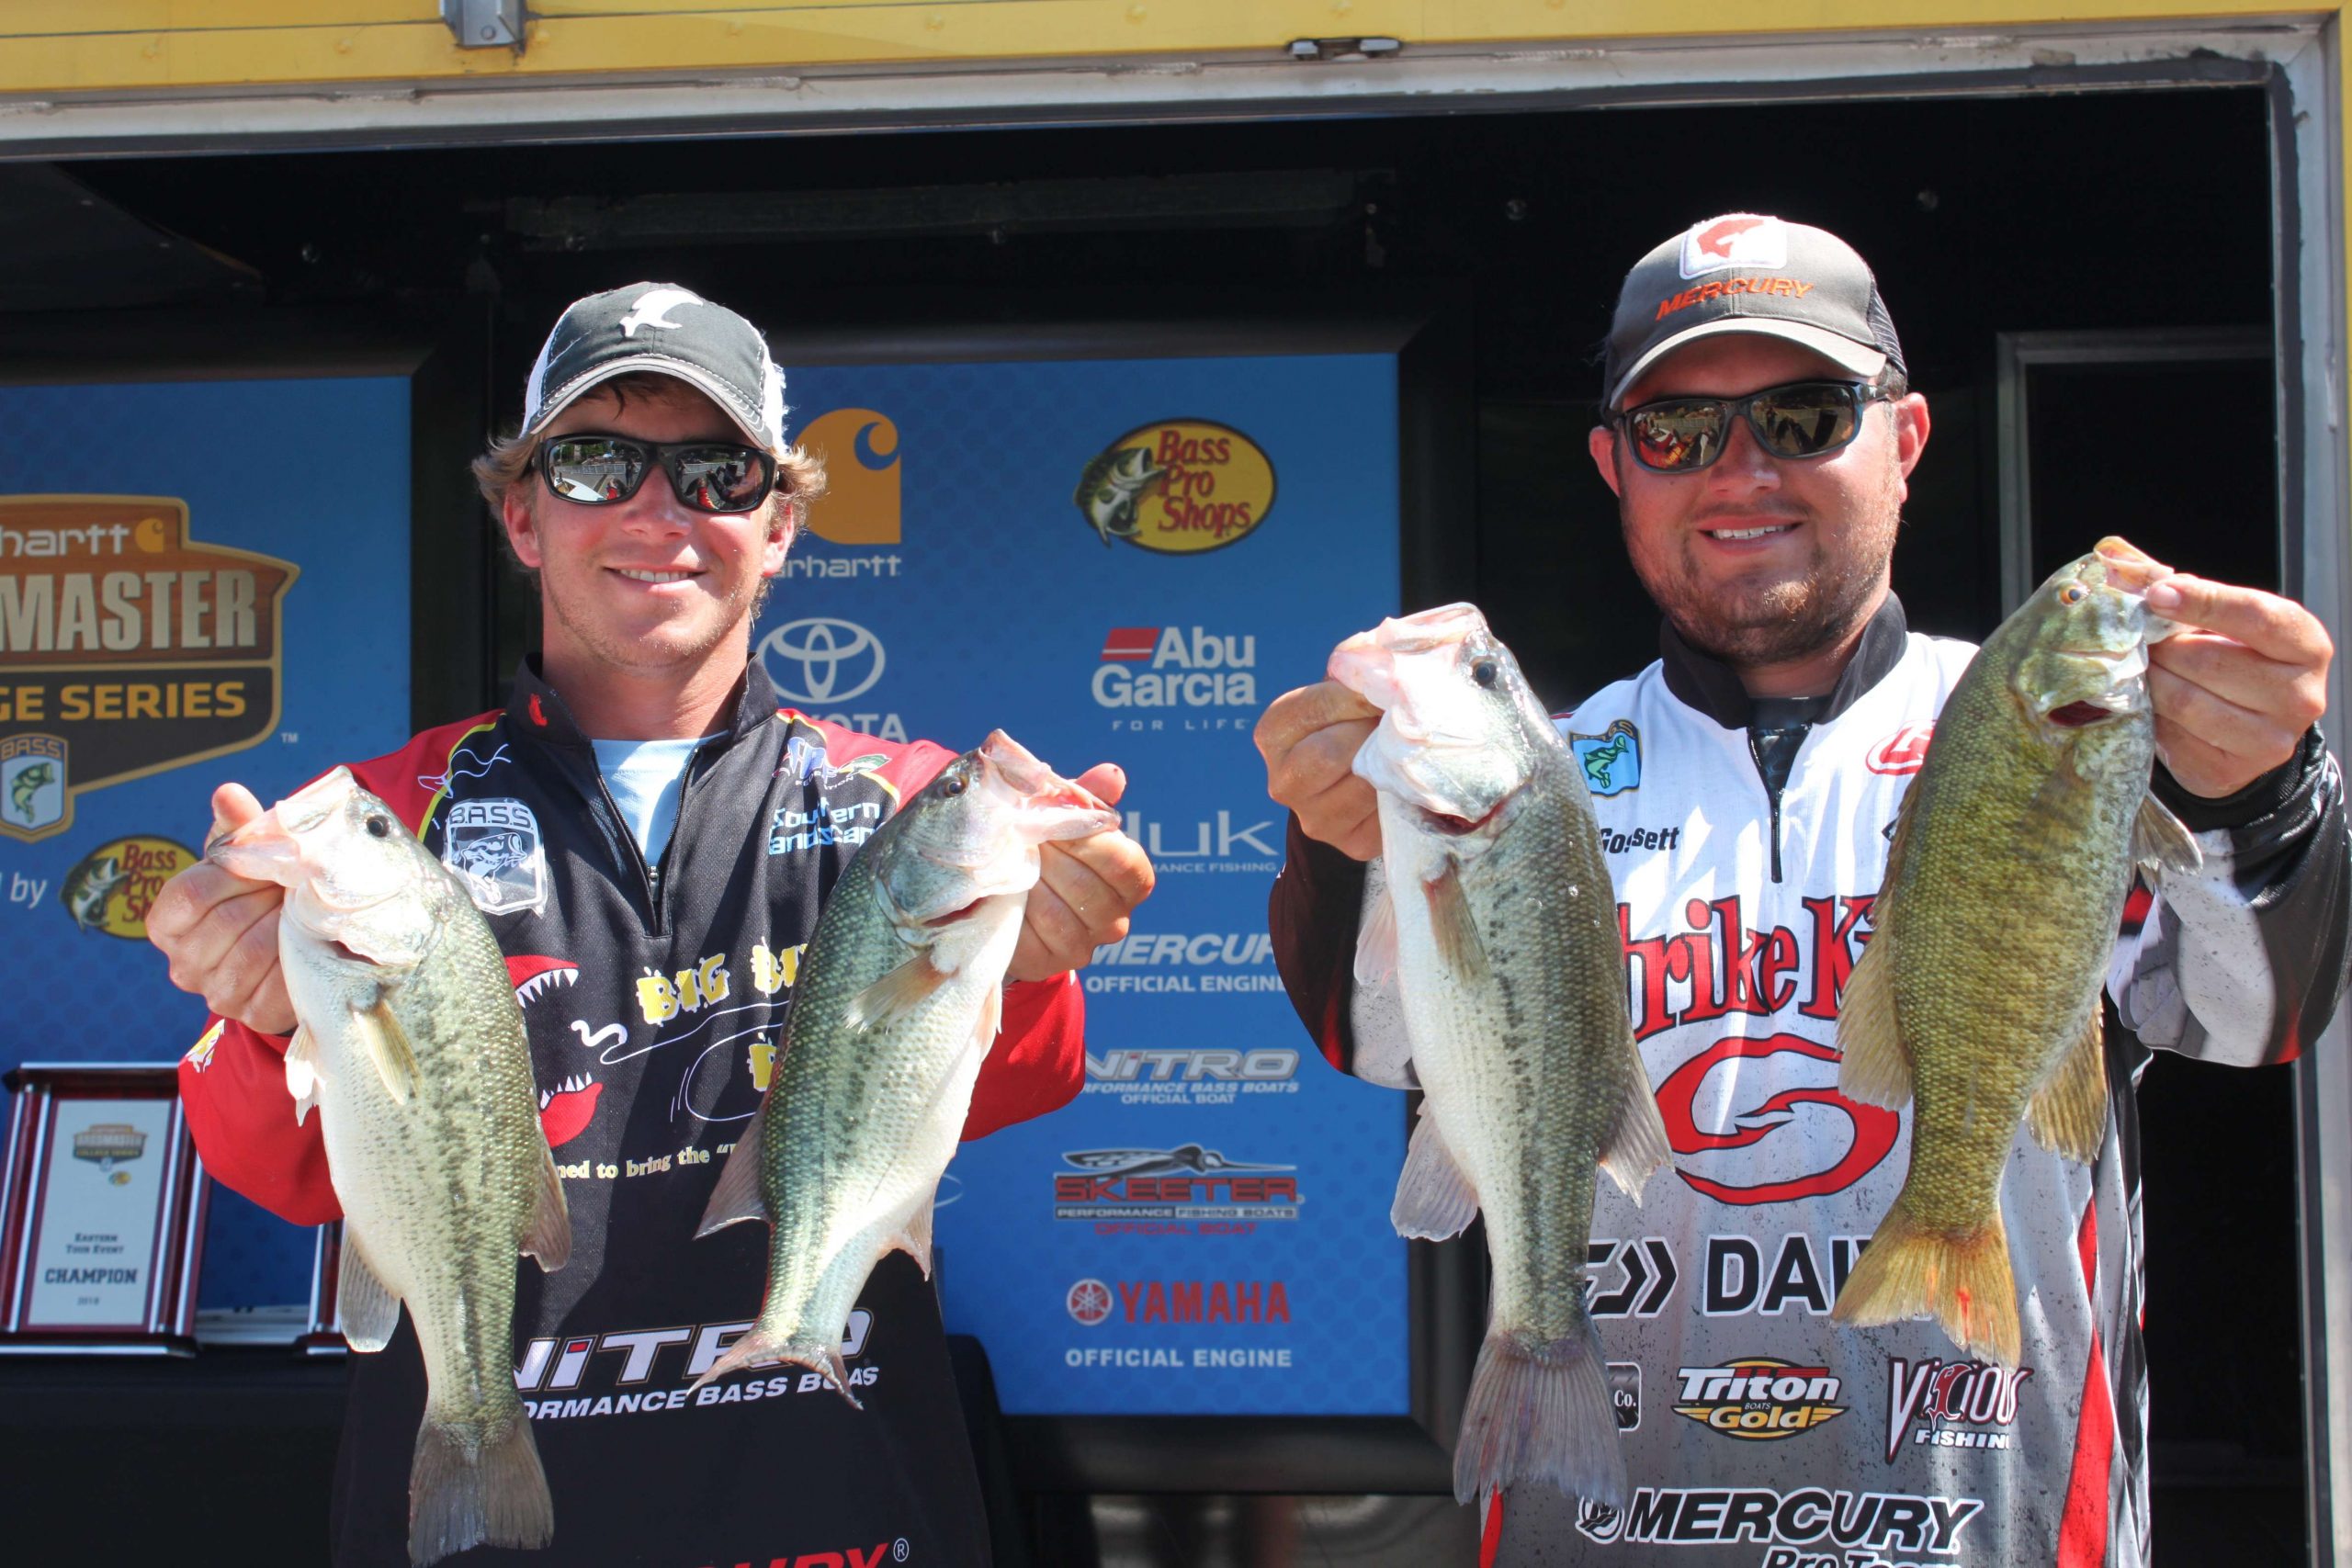 Zeke Gossett and Hayden Bartee of Jefferson State University placed 22nd with 34-6.